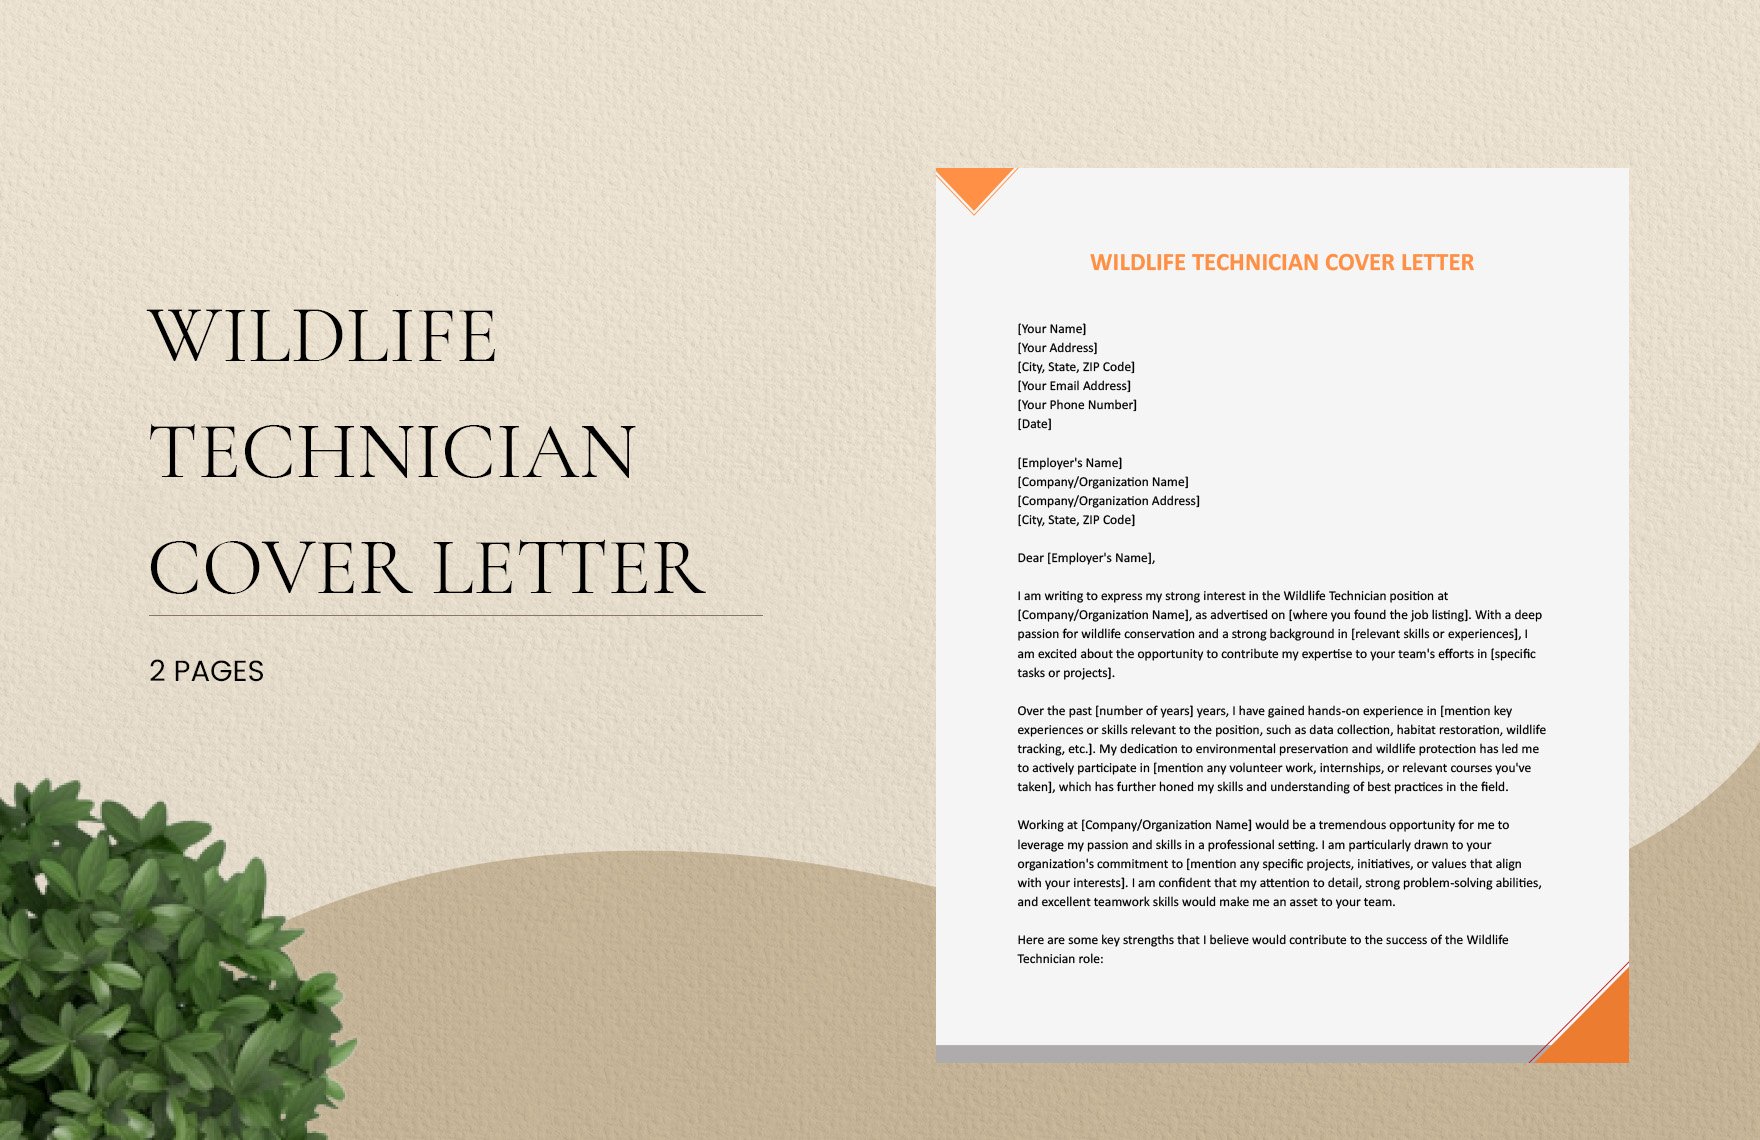 Wildlife Technician Cover Letter in Word, Google Docs